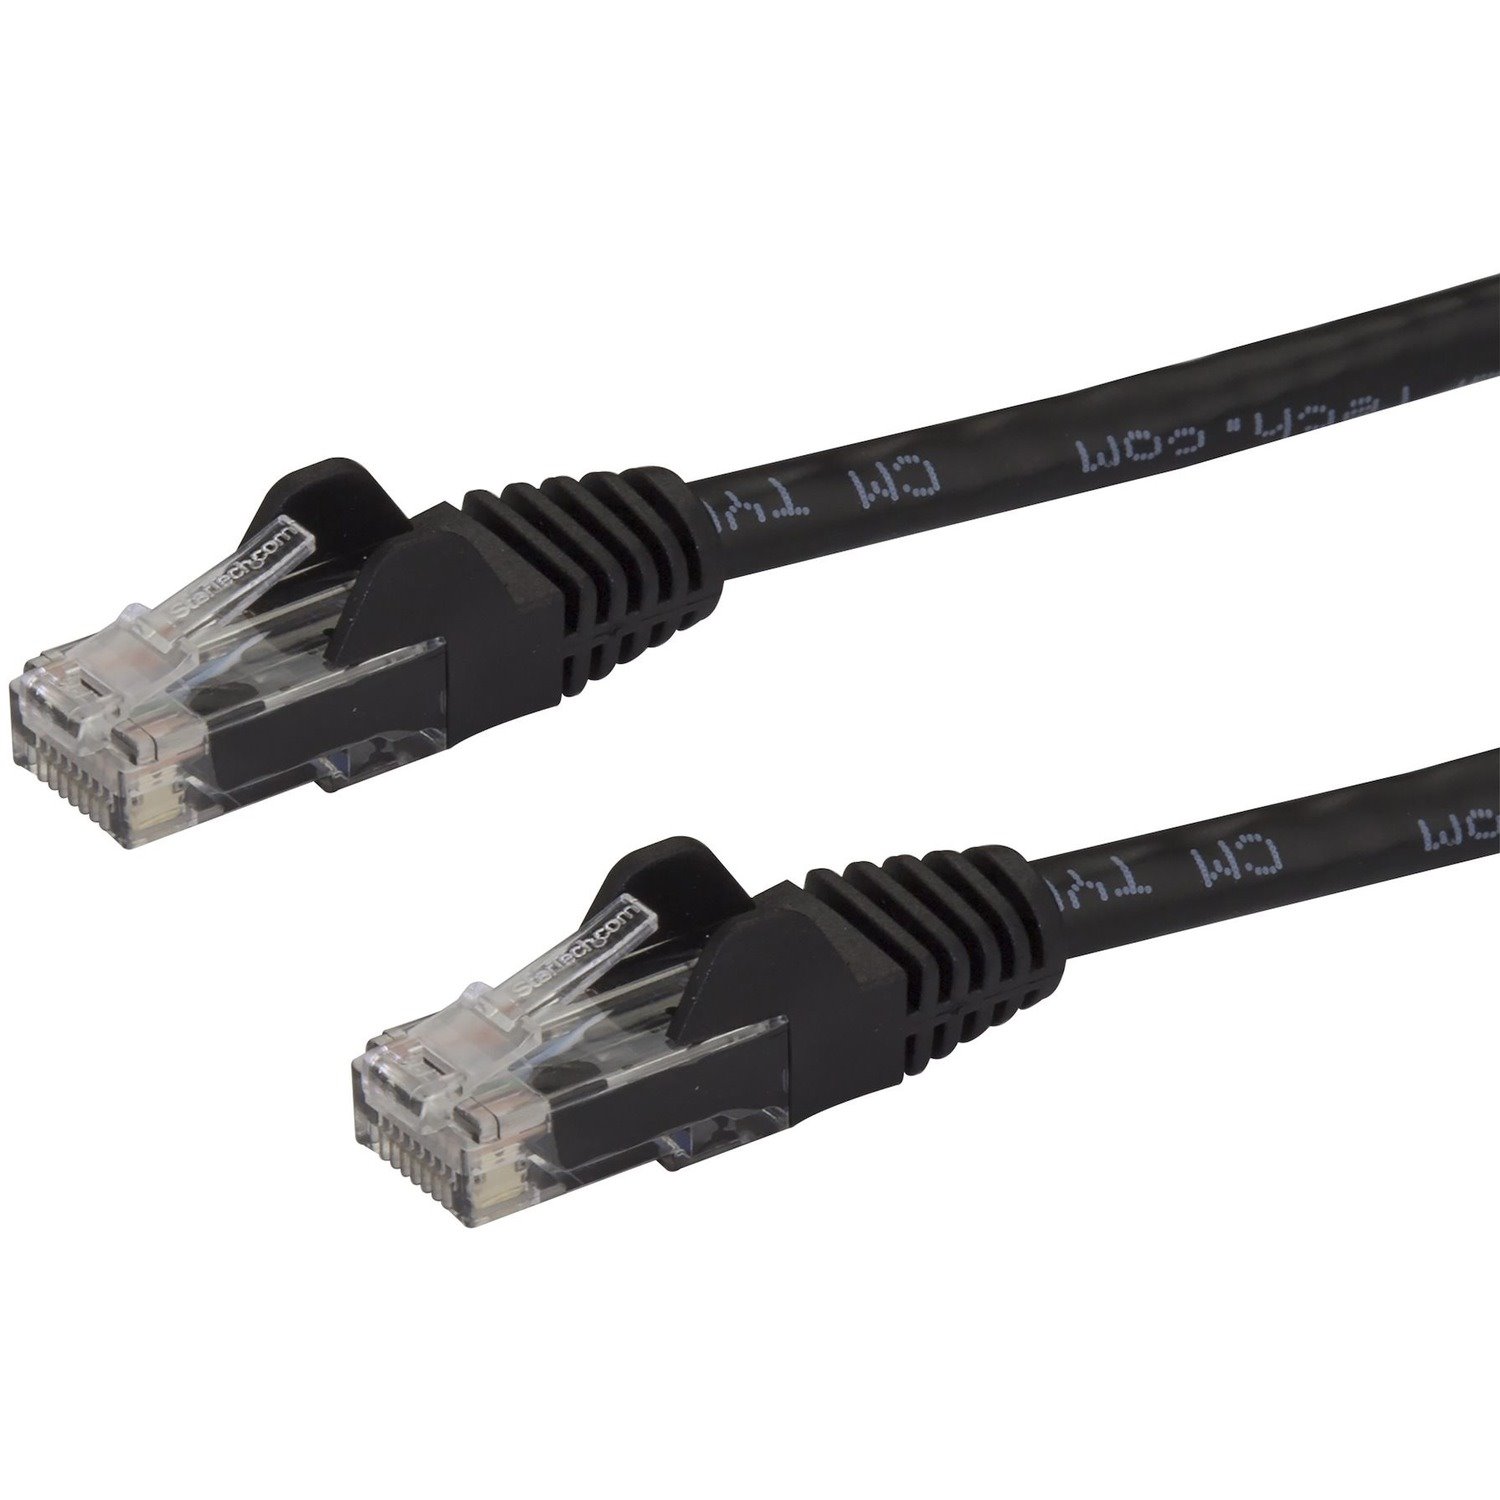 StarTech.com 7 m Category 6 Network Cable for Network Device, Wall Outlet, Workstation, Distribution Panel, VoIP Device, Hub, Security Device - 1